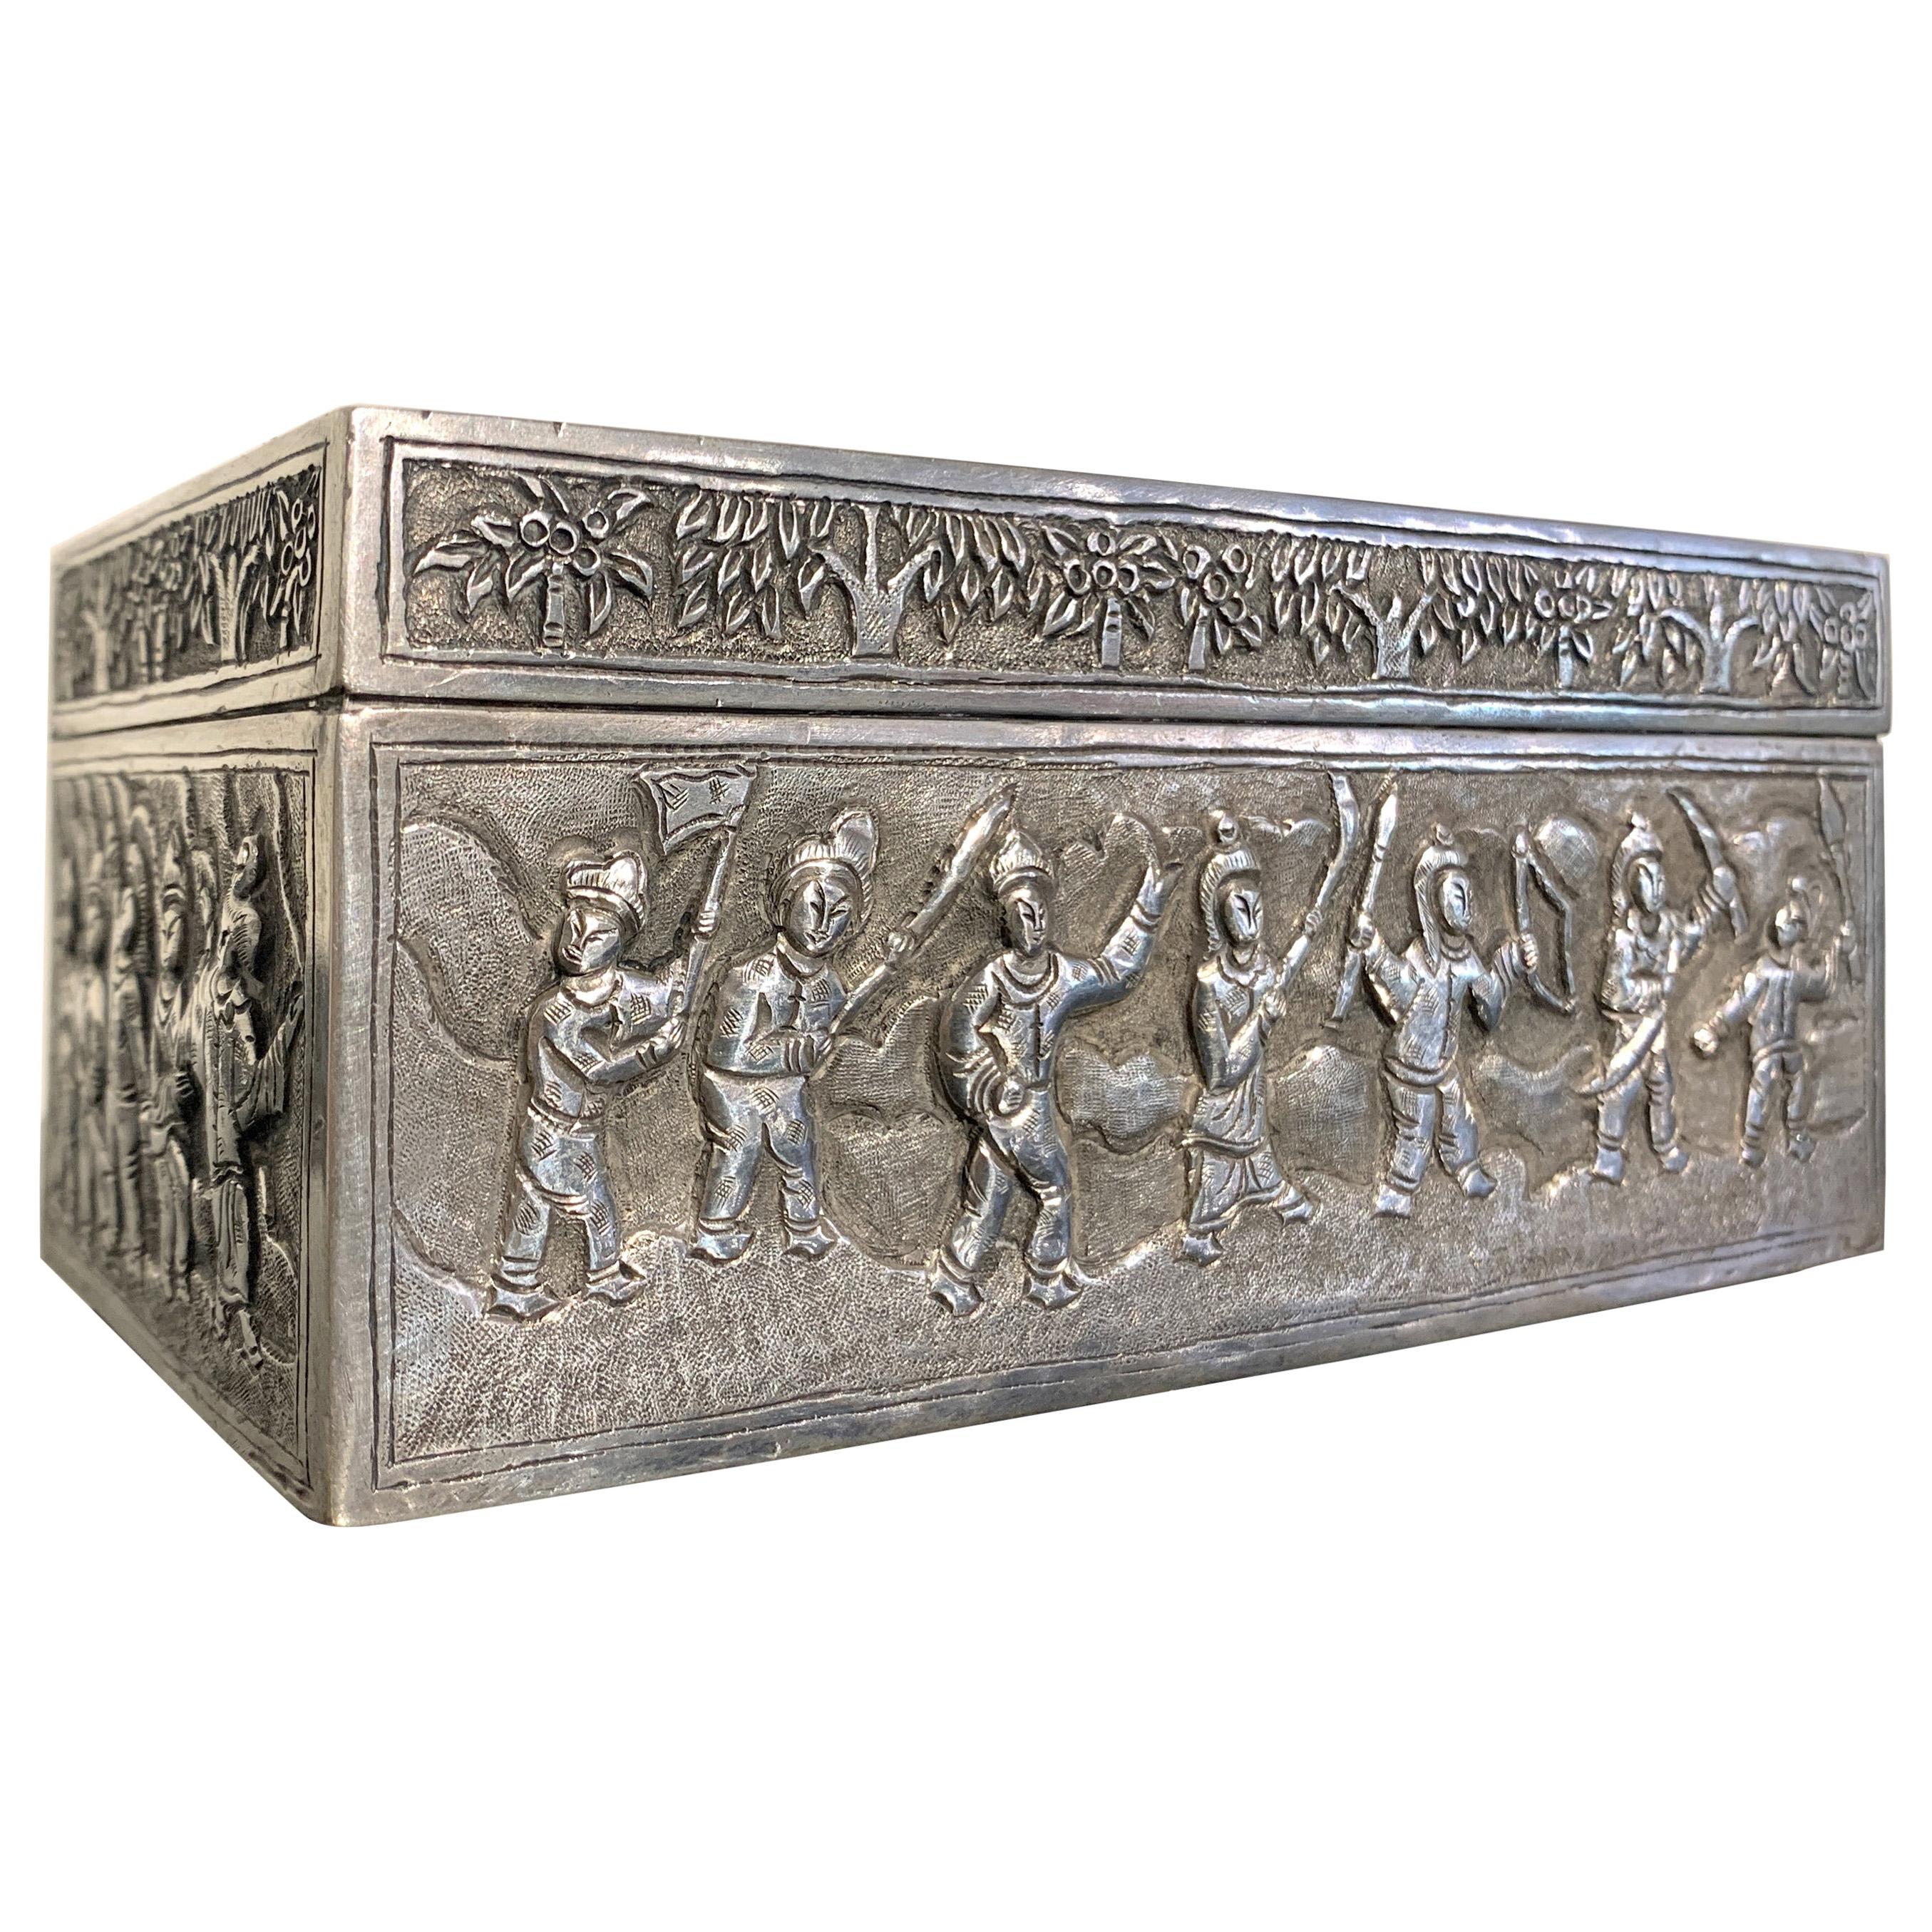 Chinese Silver Repoussé Box with Warriors, Early 20th Century, China